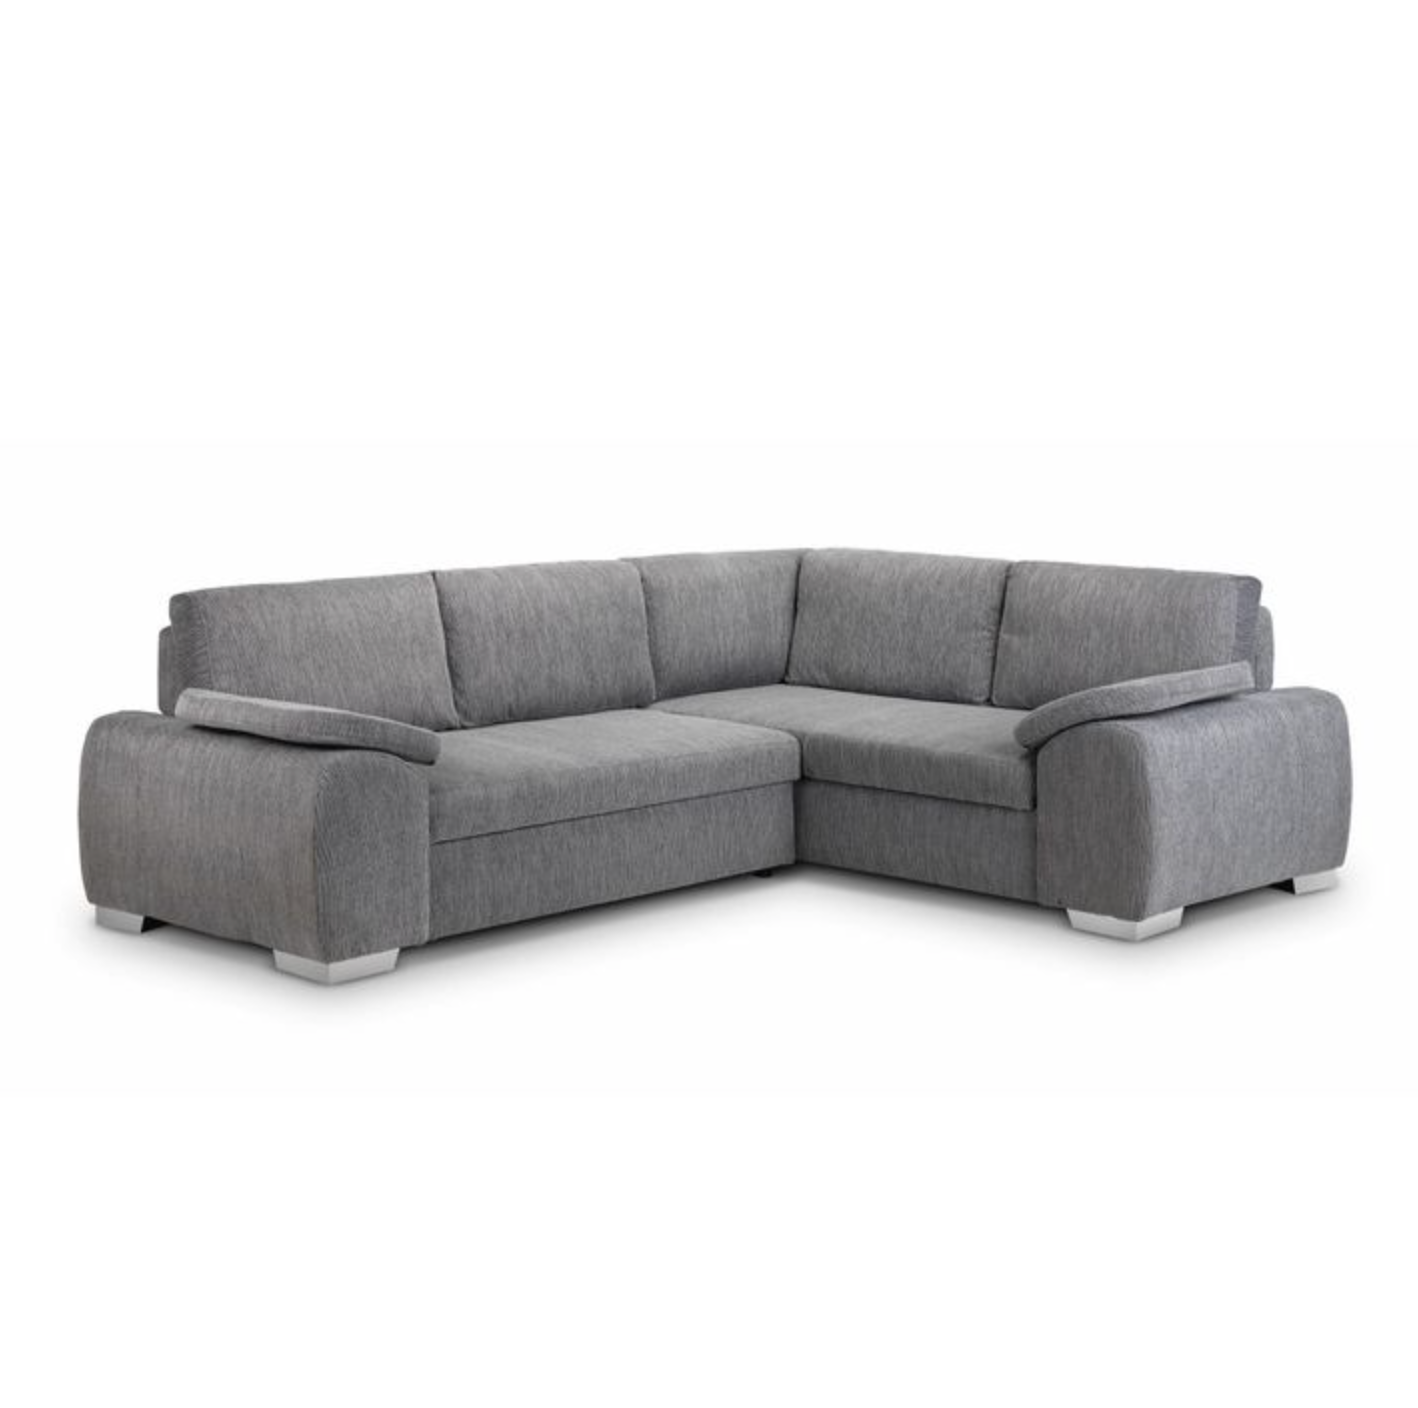 Sussex Right Hand Sofa Bed-Storage Grey Fabric